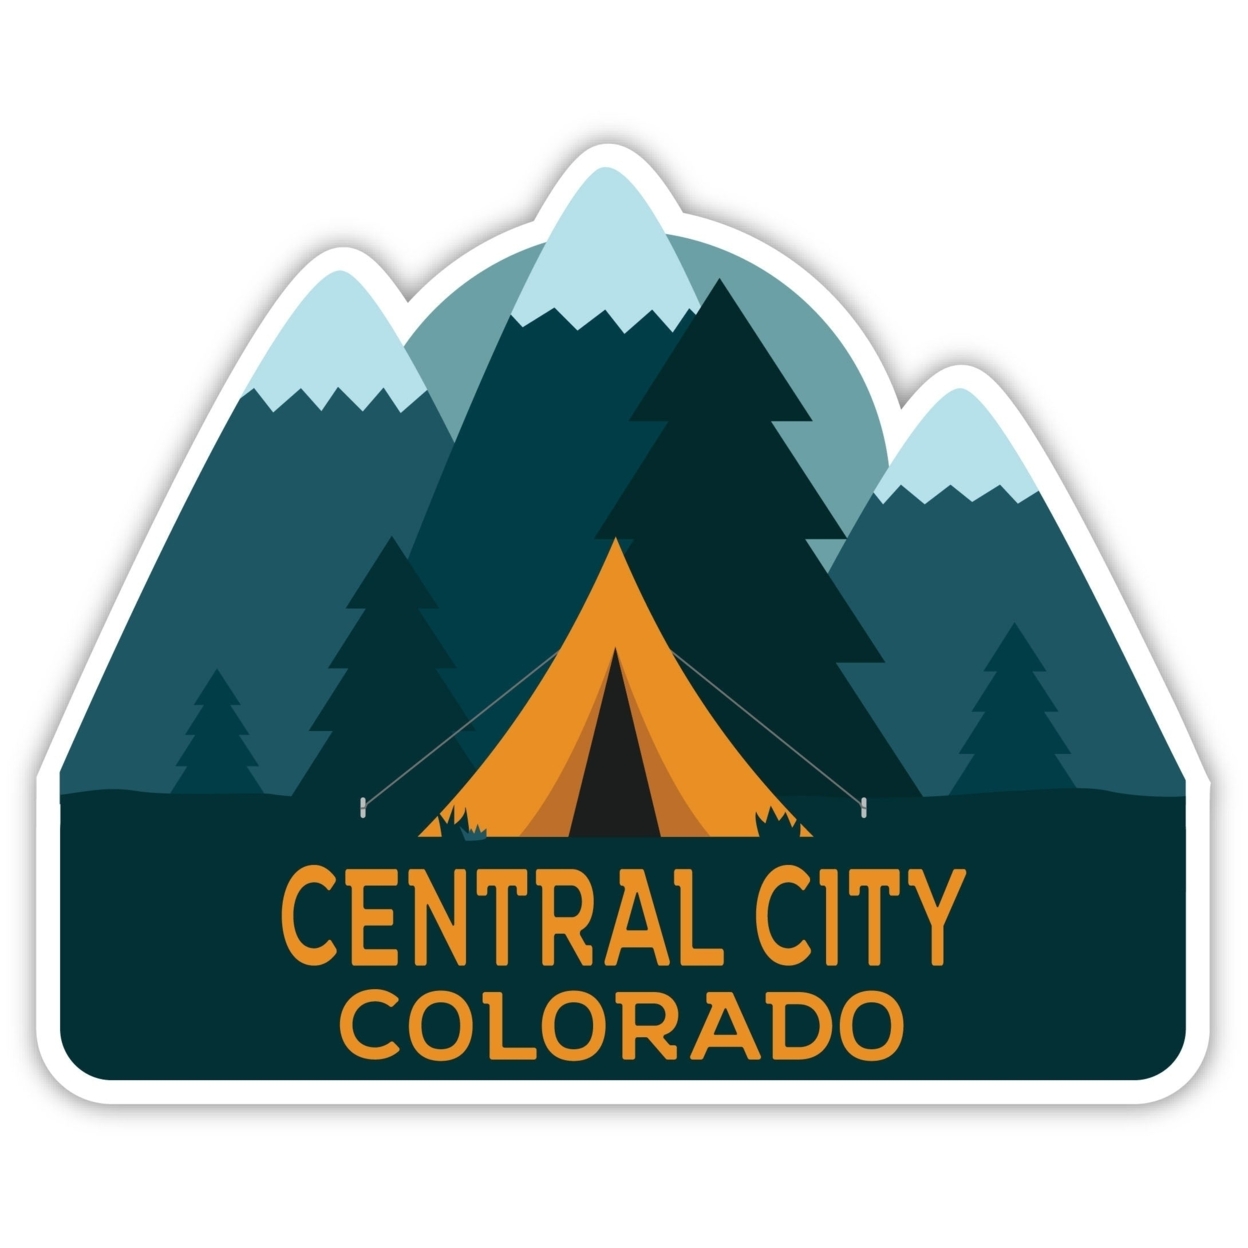 Central City Colorado Souvenir Decorative Stickers (Choose Theme And Size) - 4-Pack, 4-Inch, Tent